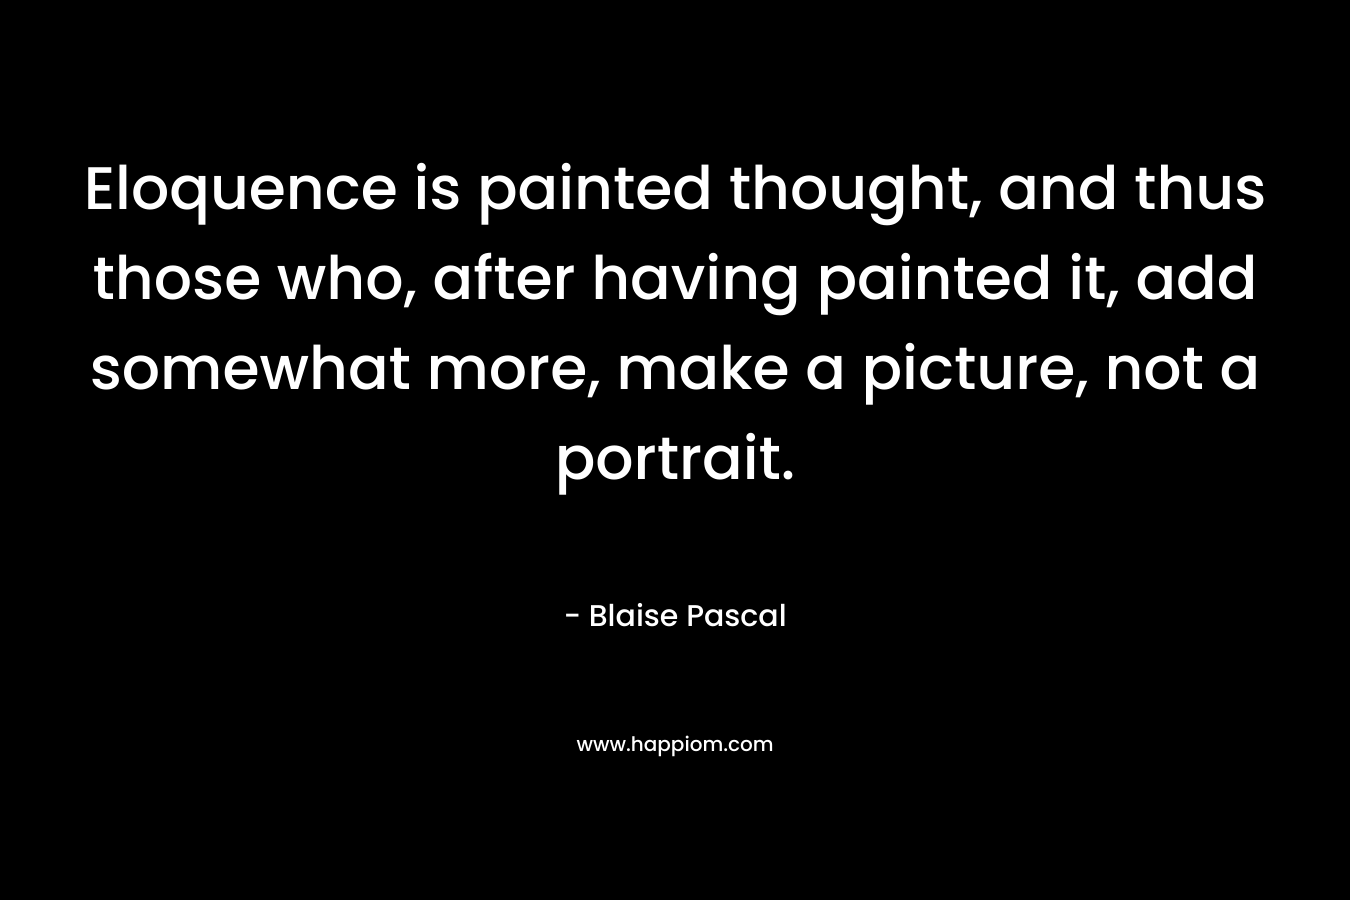 Eloquence is painted thought, and thus those who, after having painted it, add somewhat more, make a picture, not a portrait.